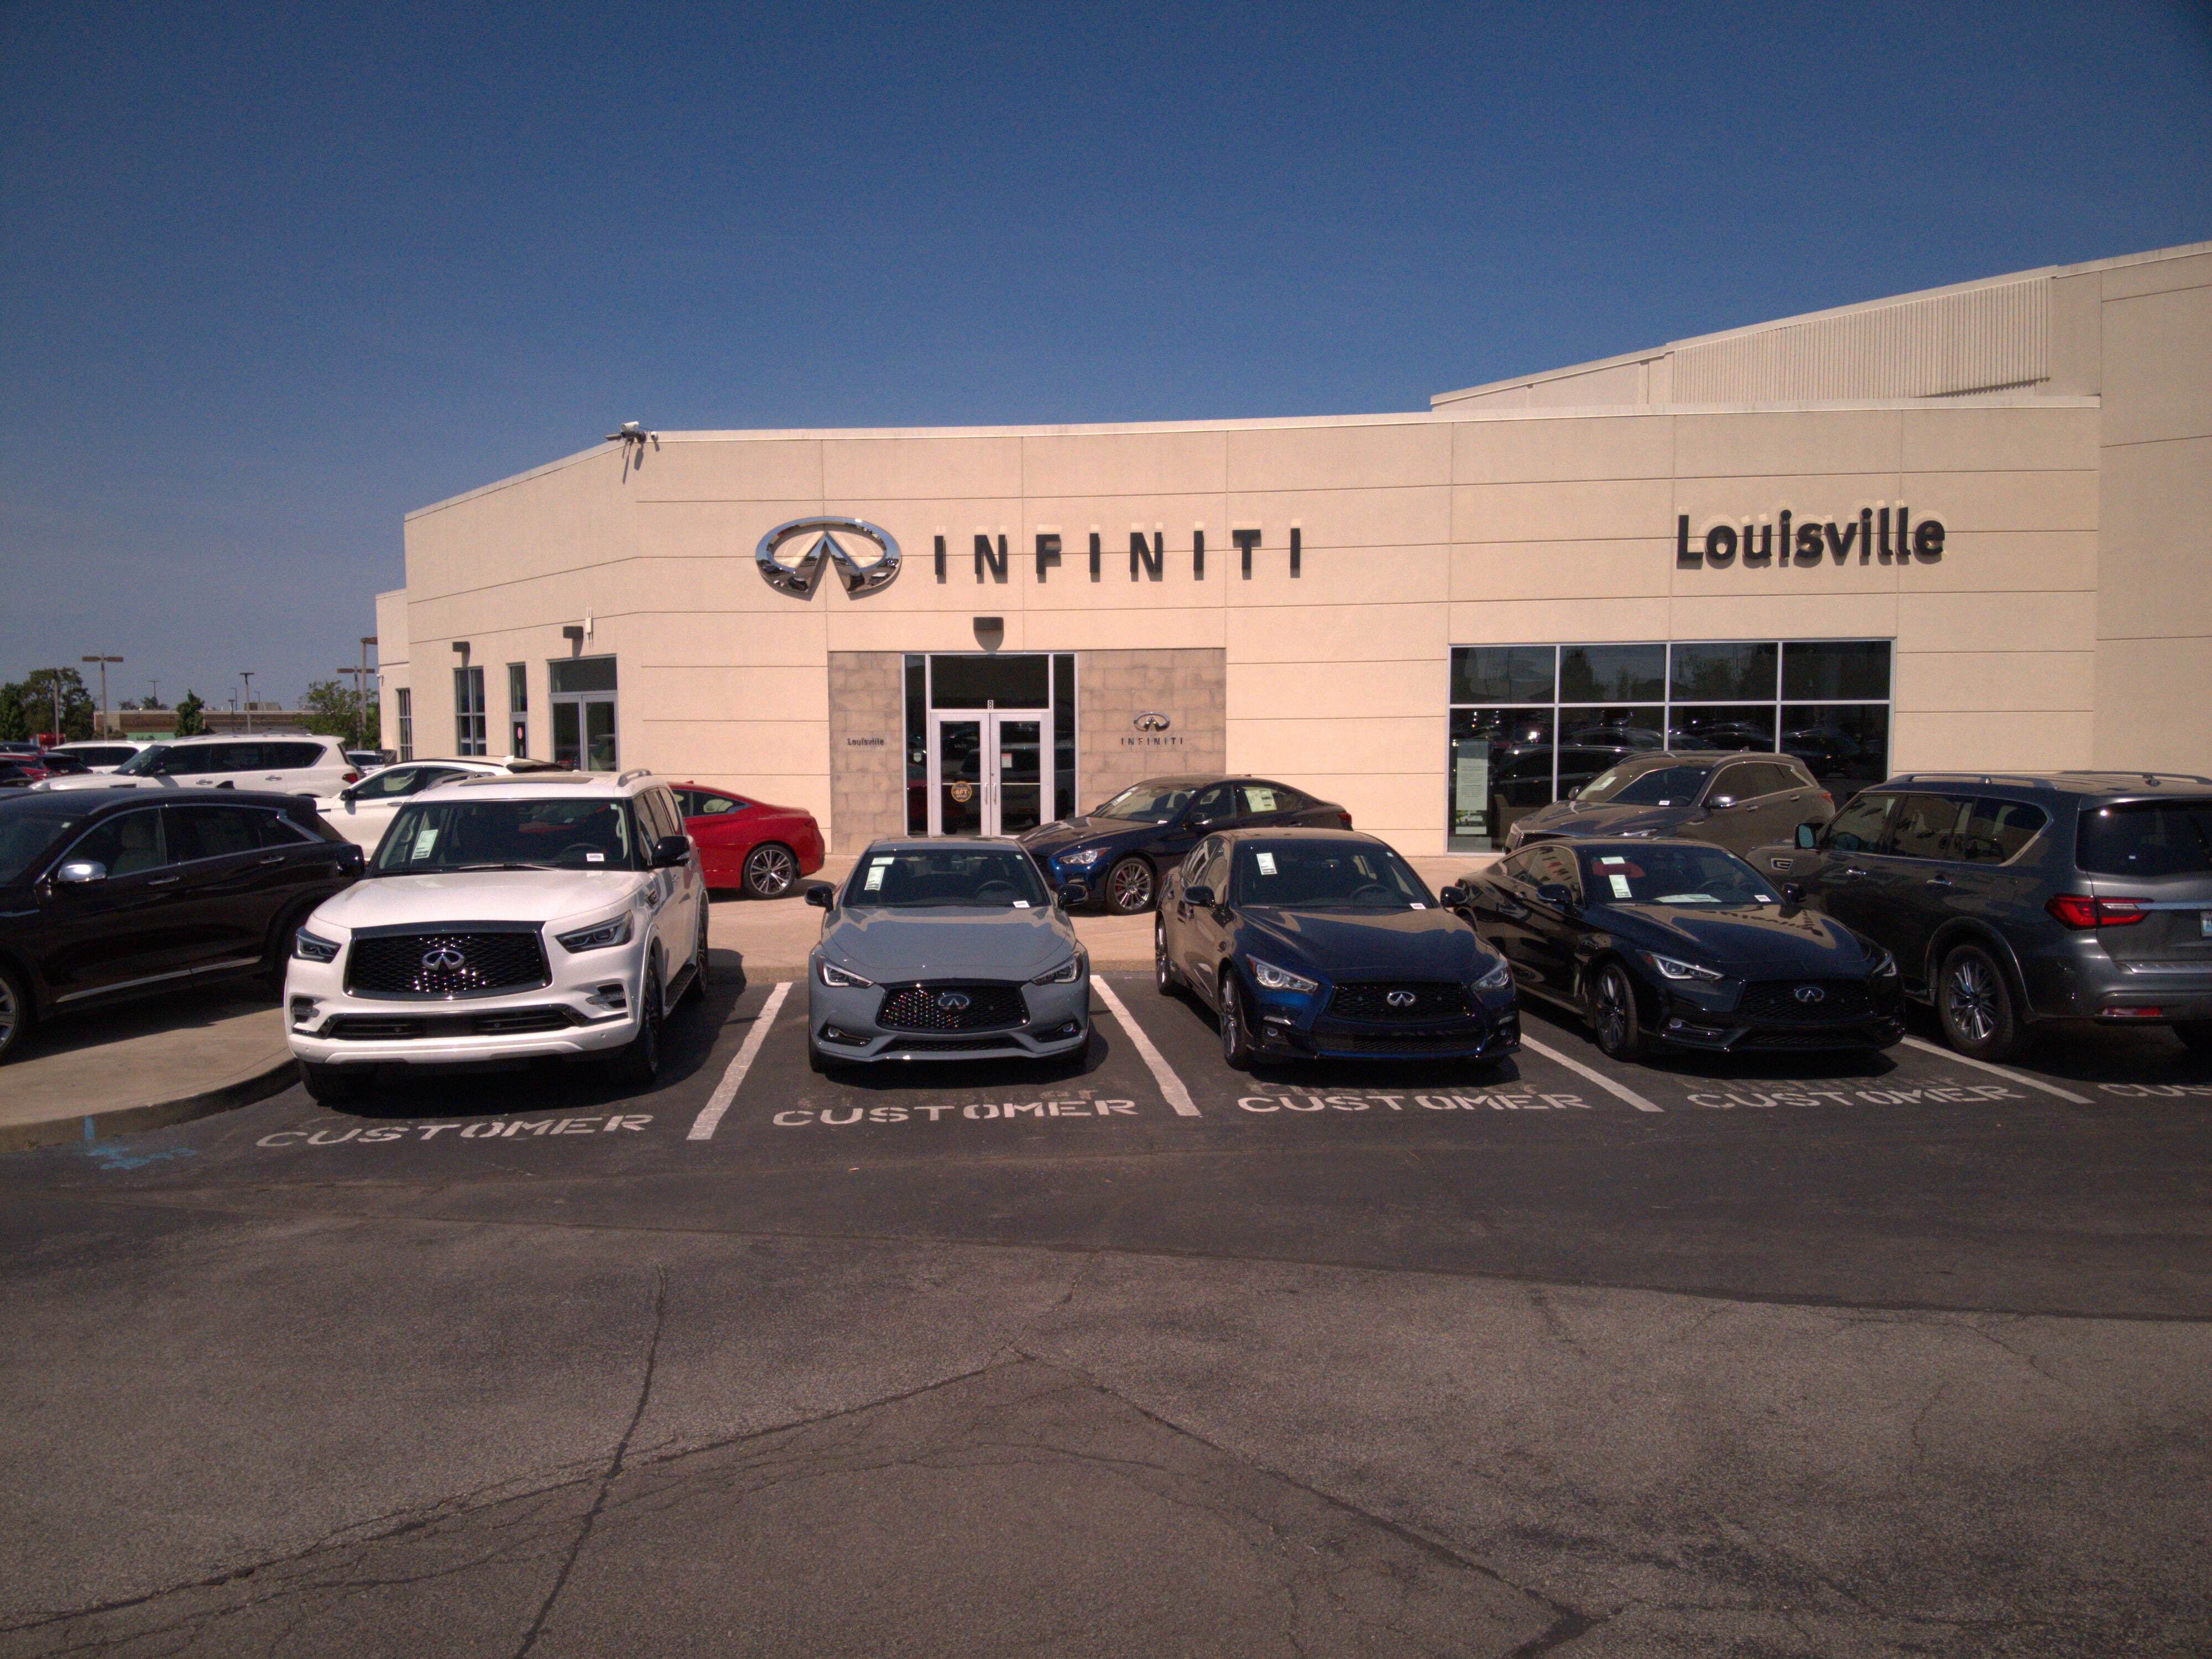 The Louisville INFINITI dealership is proud to invite you to come in and see their new 2021 and 2022 models, including INFINITI Q50, INFINITI QX60, INFINITI G35, INFINITIQ60, INFINITI G37, and more!